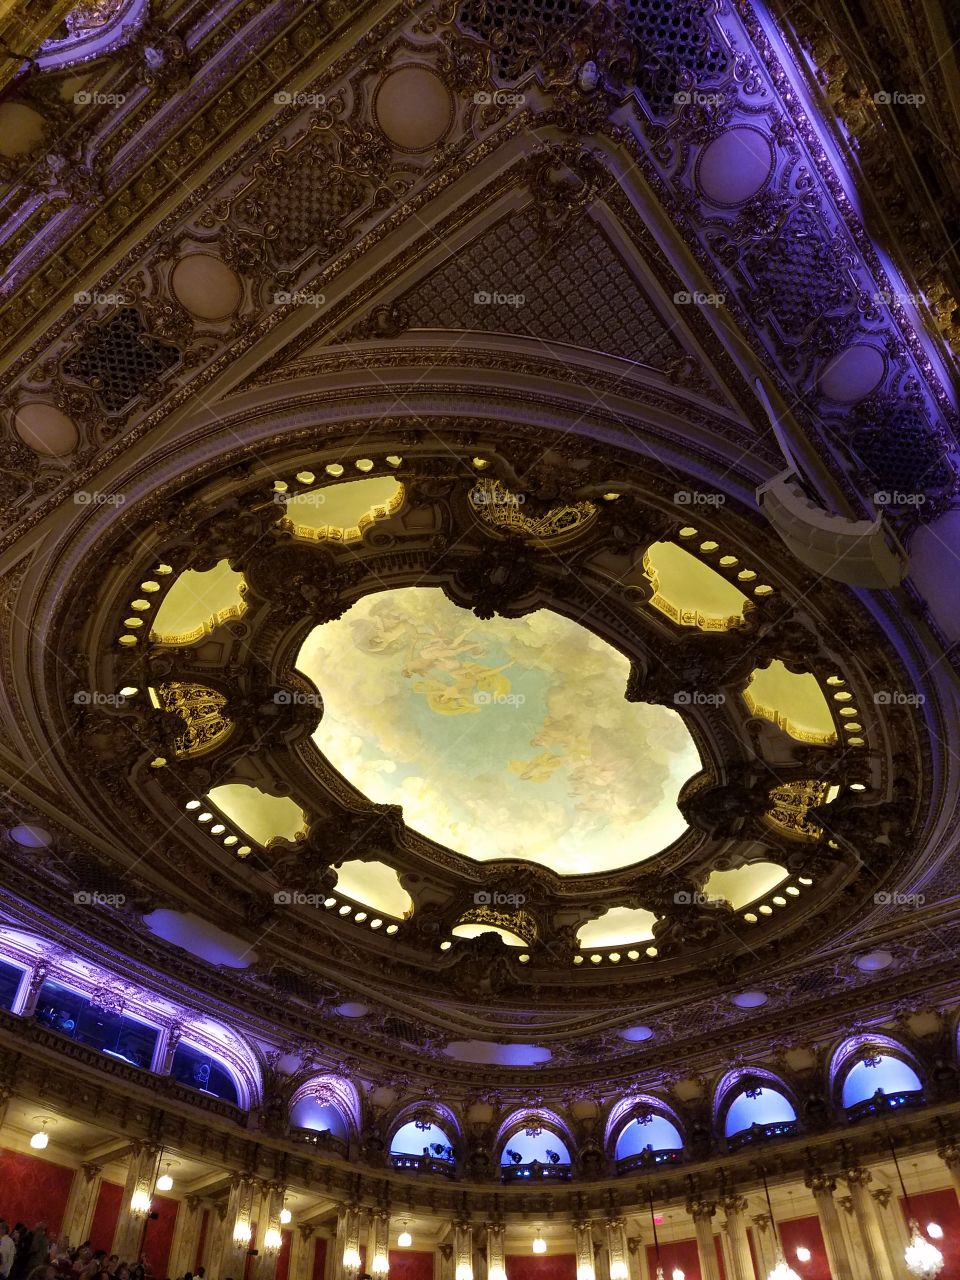 Opera House ceiling with painting and Light